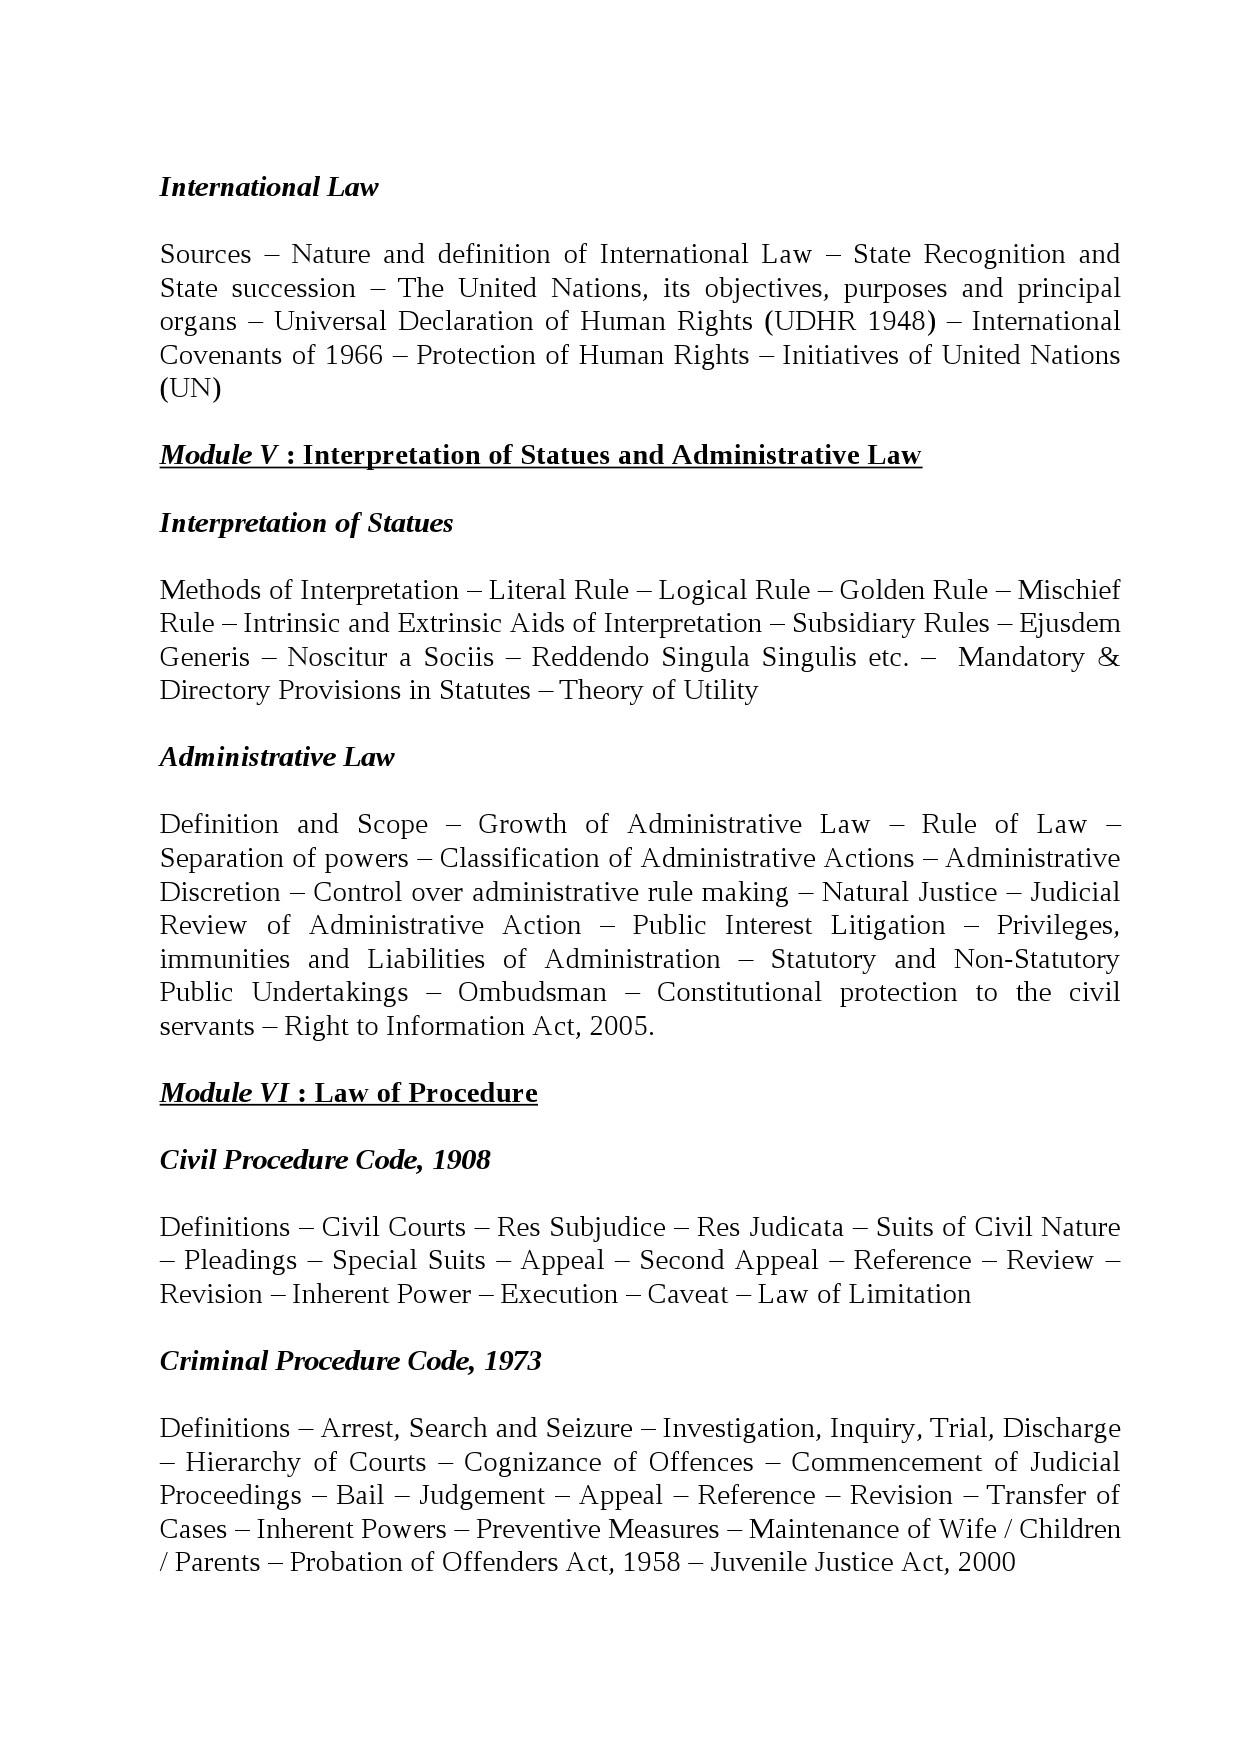 Syllabus for Exams with LLB as Qualification - Notification Image 7